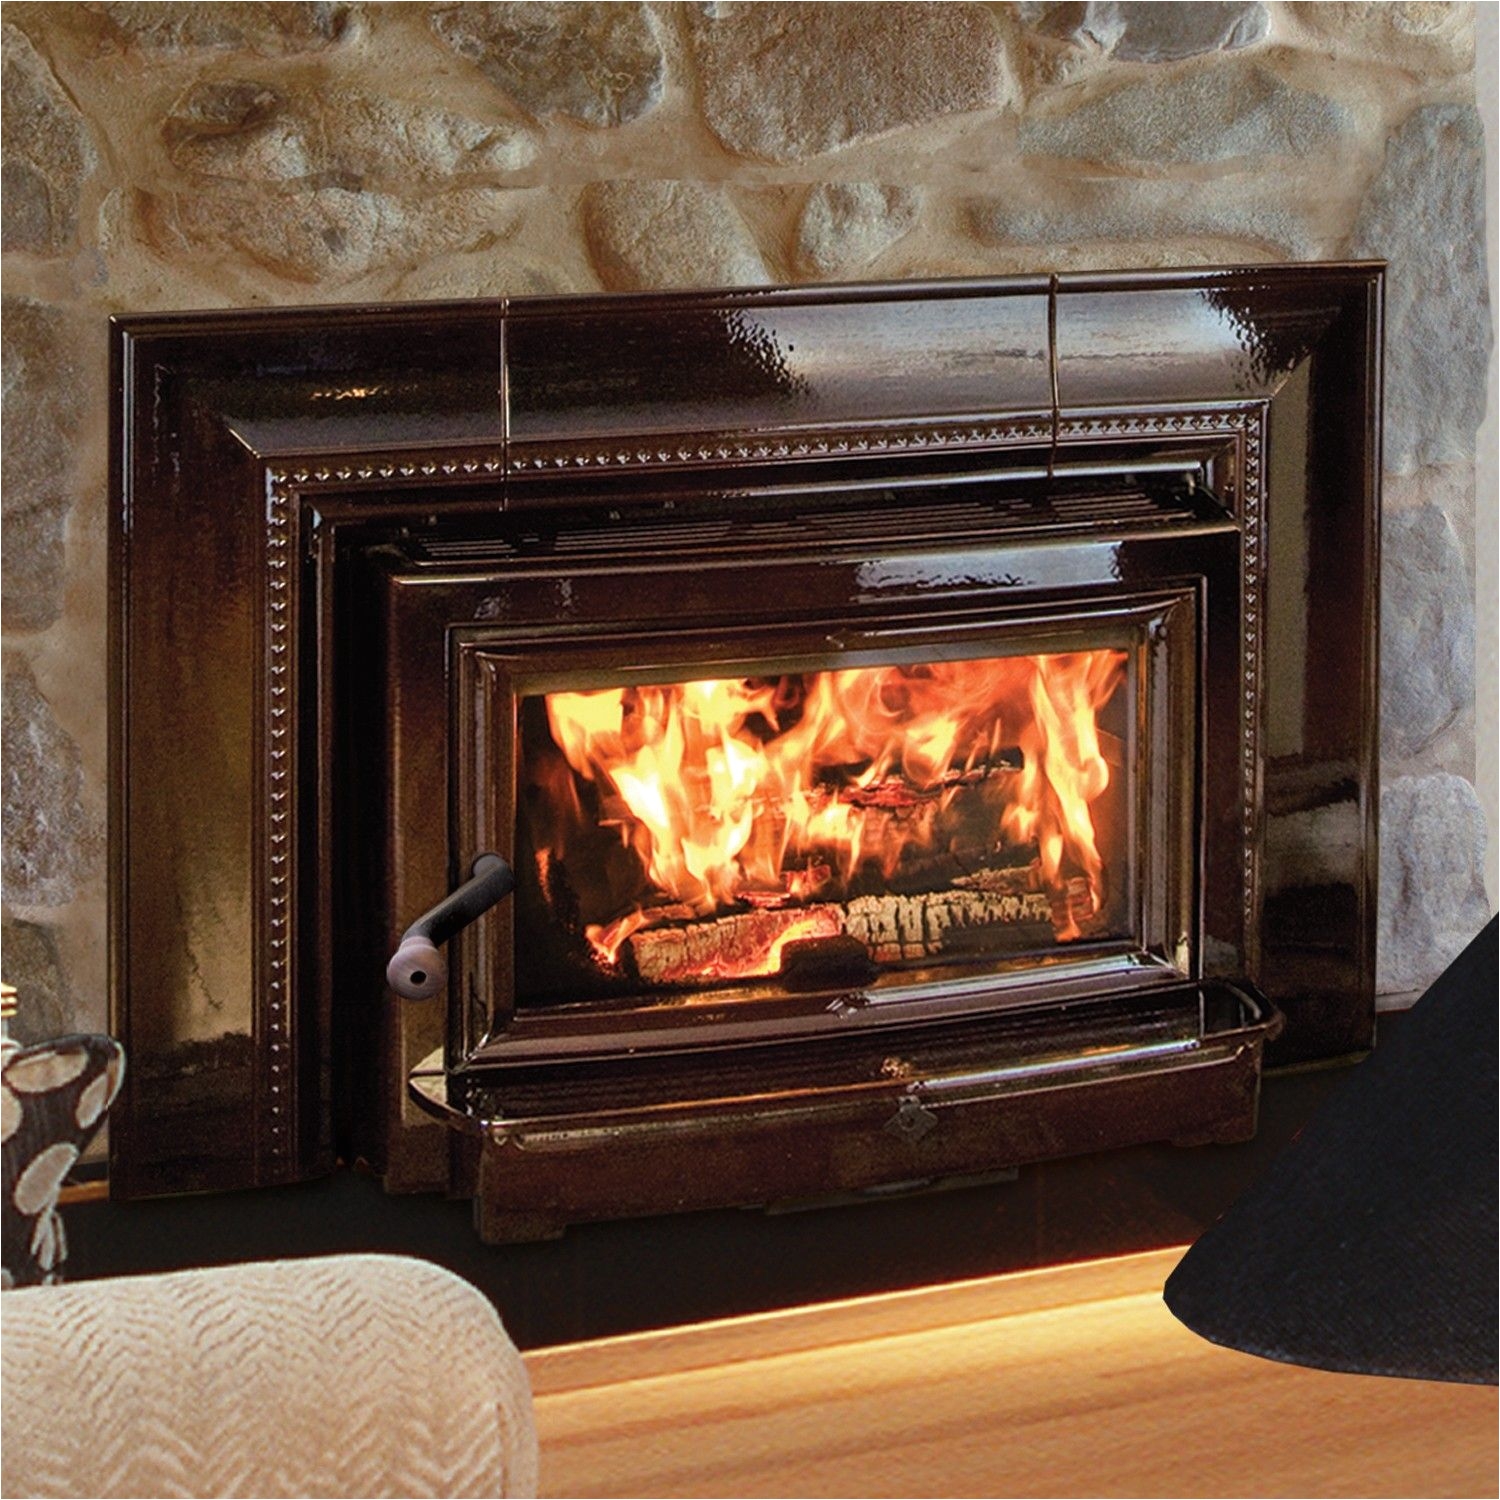 propane fireplace insert repair hearthstone insert clydesdale 8491 wood inserts heats up to 2 000 of propane fireplace insert repair